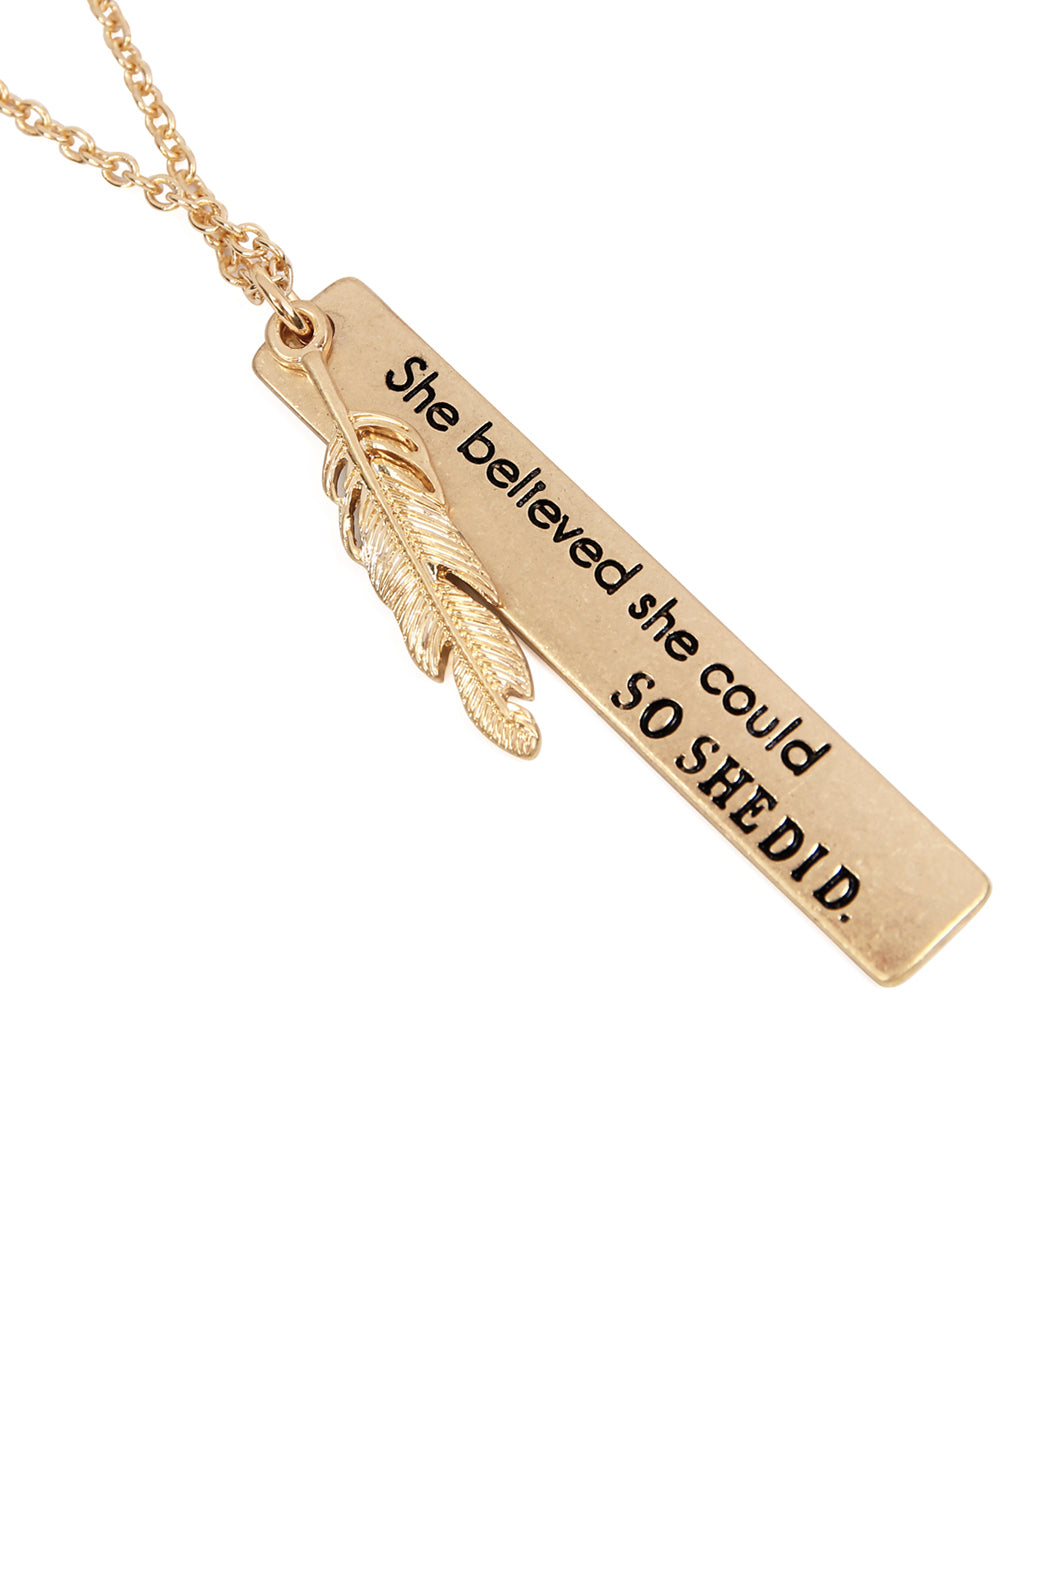 MESSAGE "SHE BELIEVED"" CHARM PENDANT NECKLACE